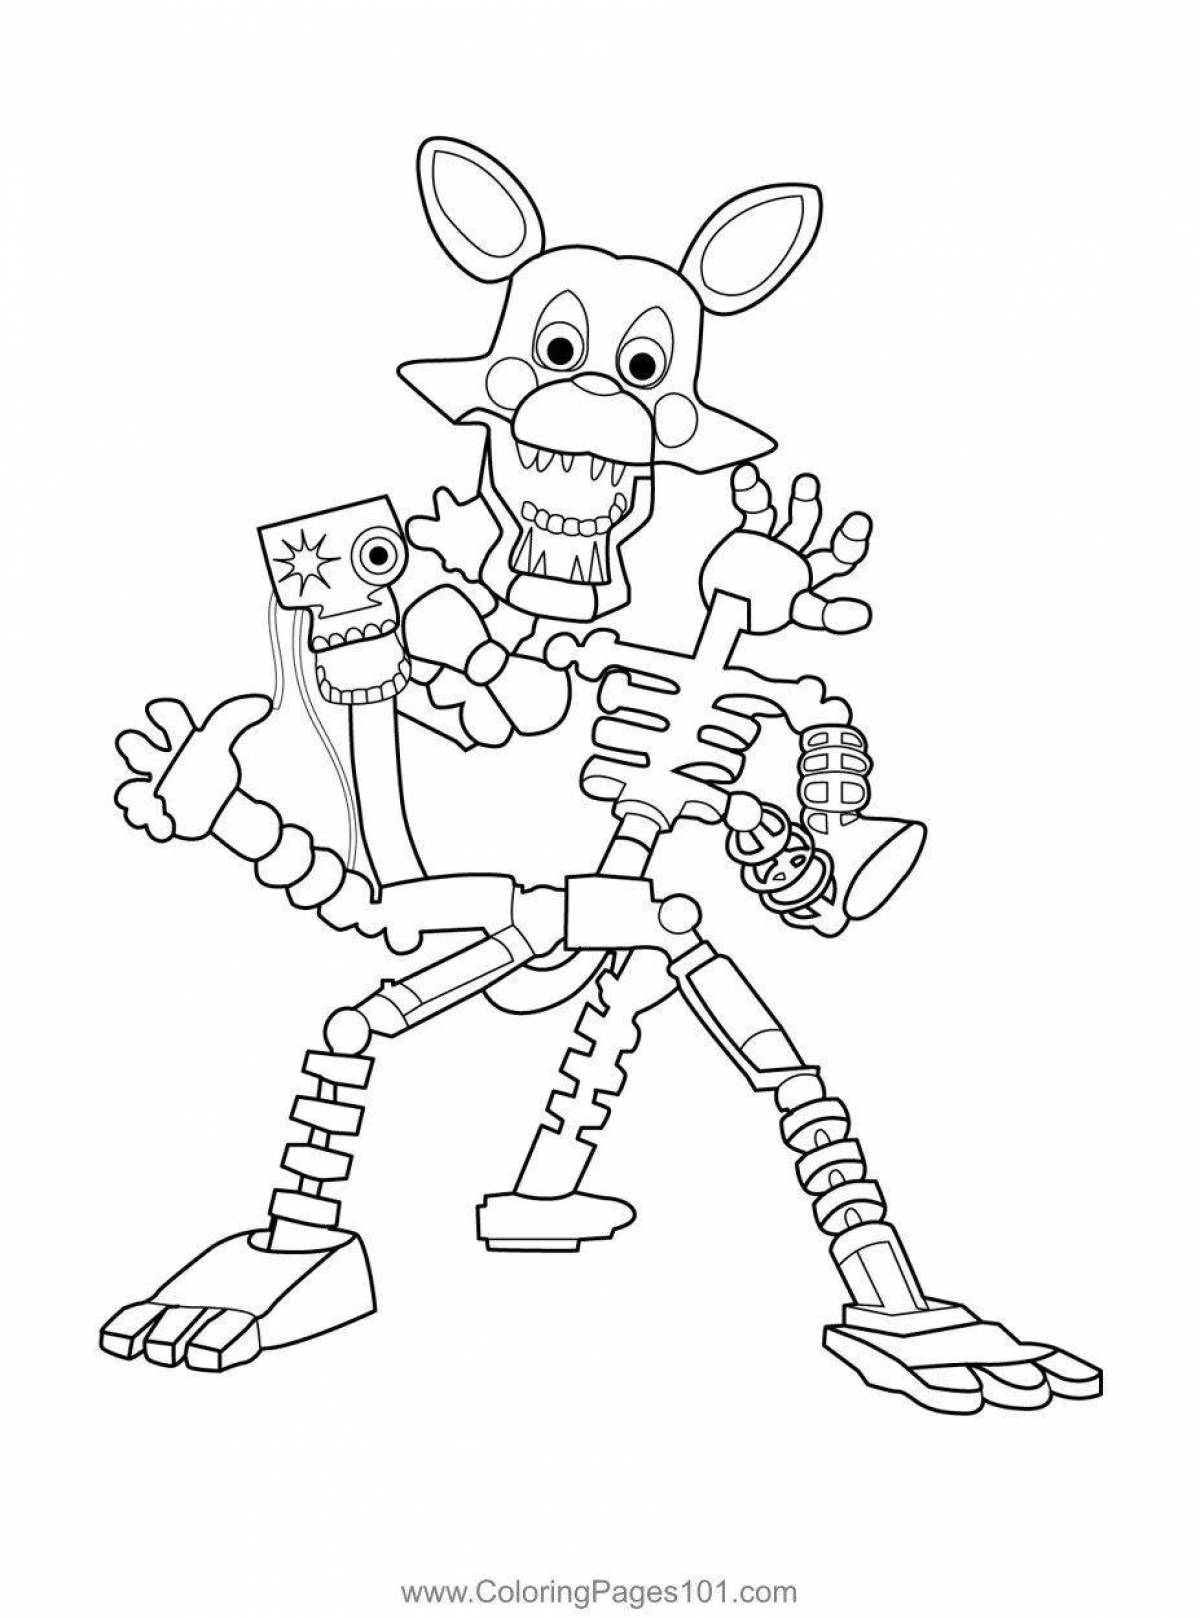 Coloring funny brazier animatronic